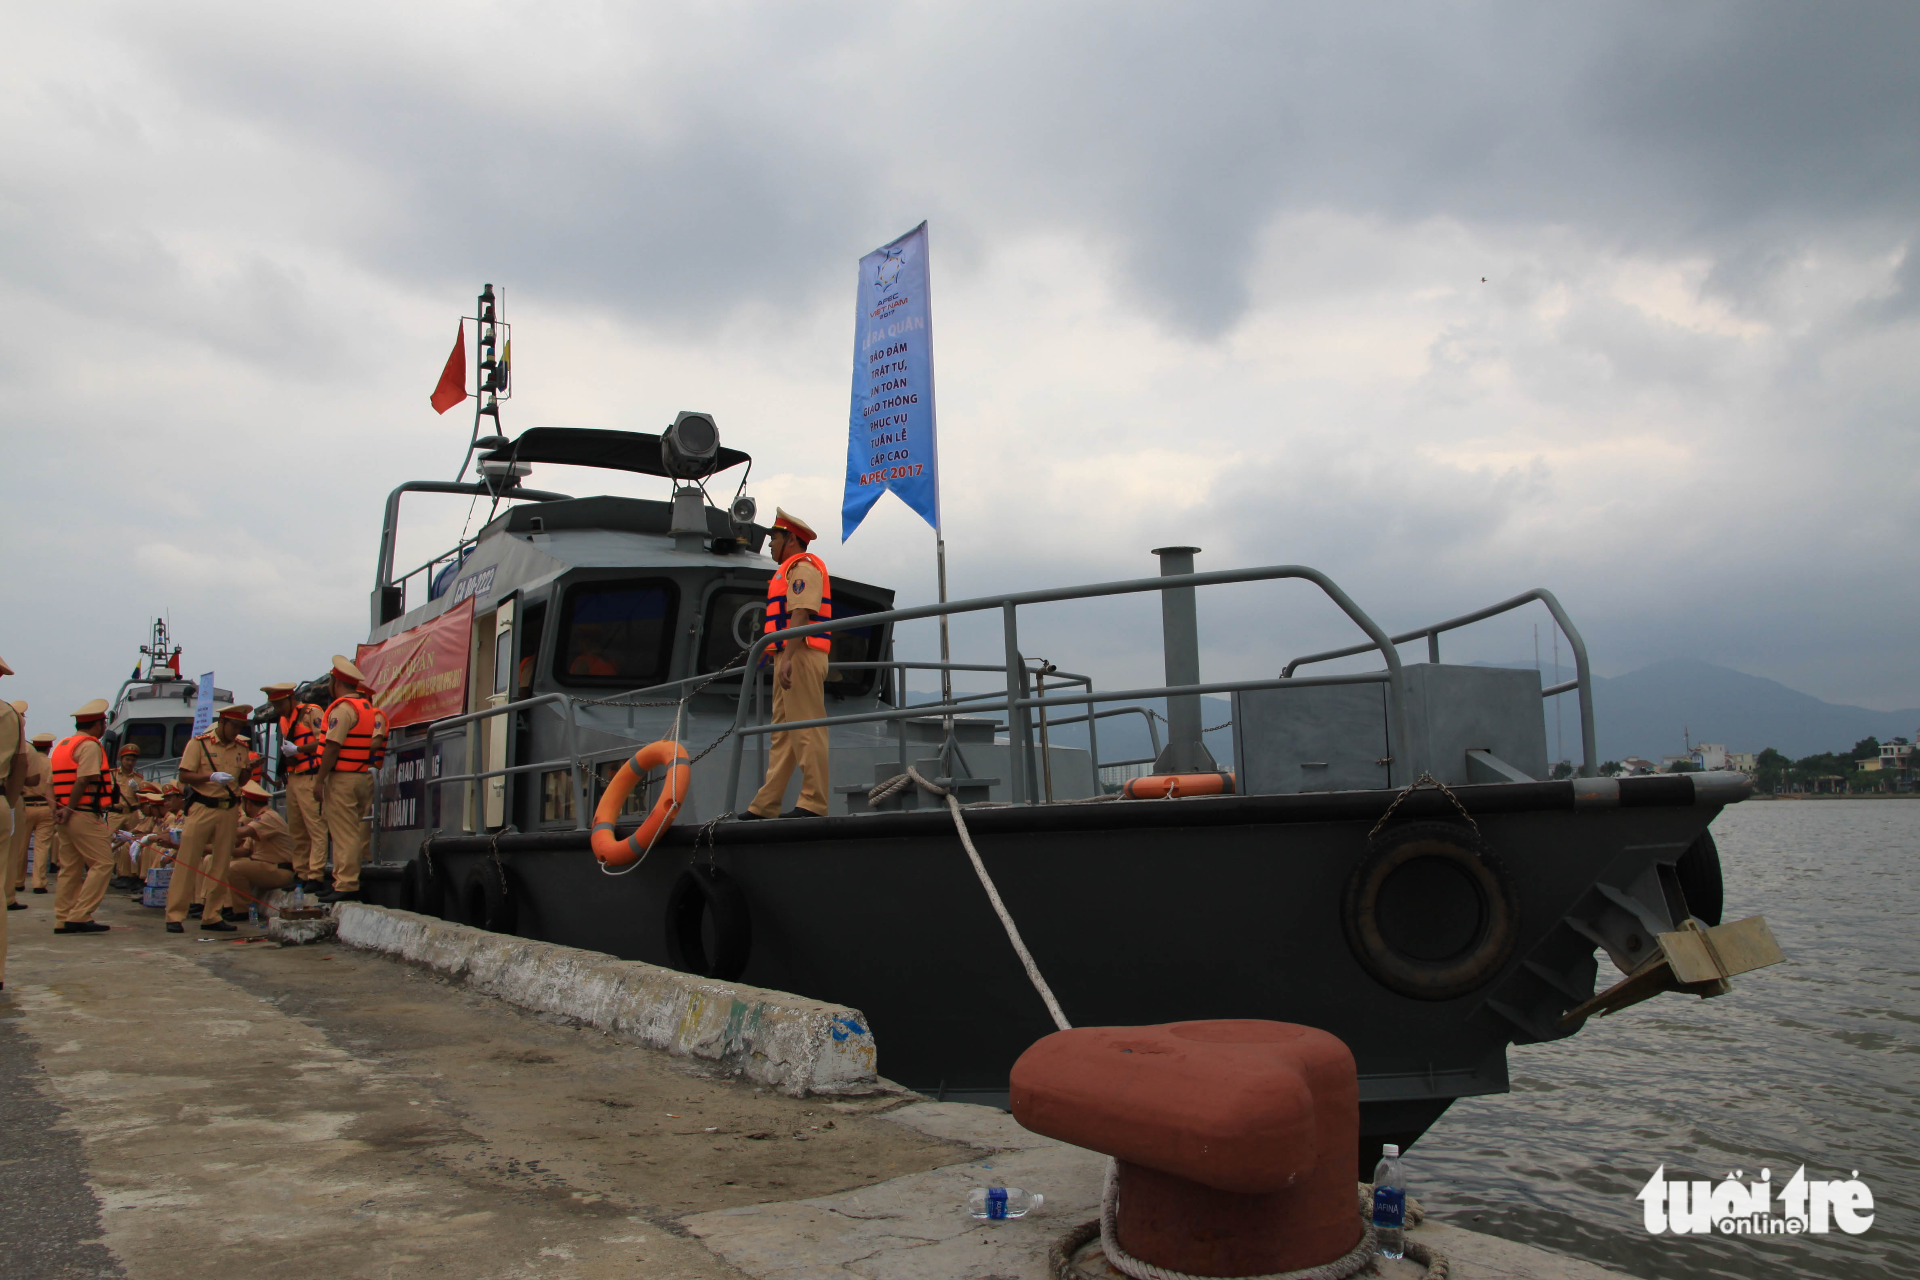 Waterway police will also take part in the missions during the APEC week.